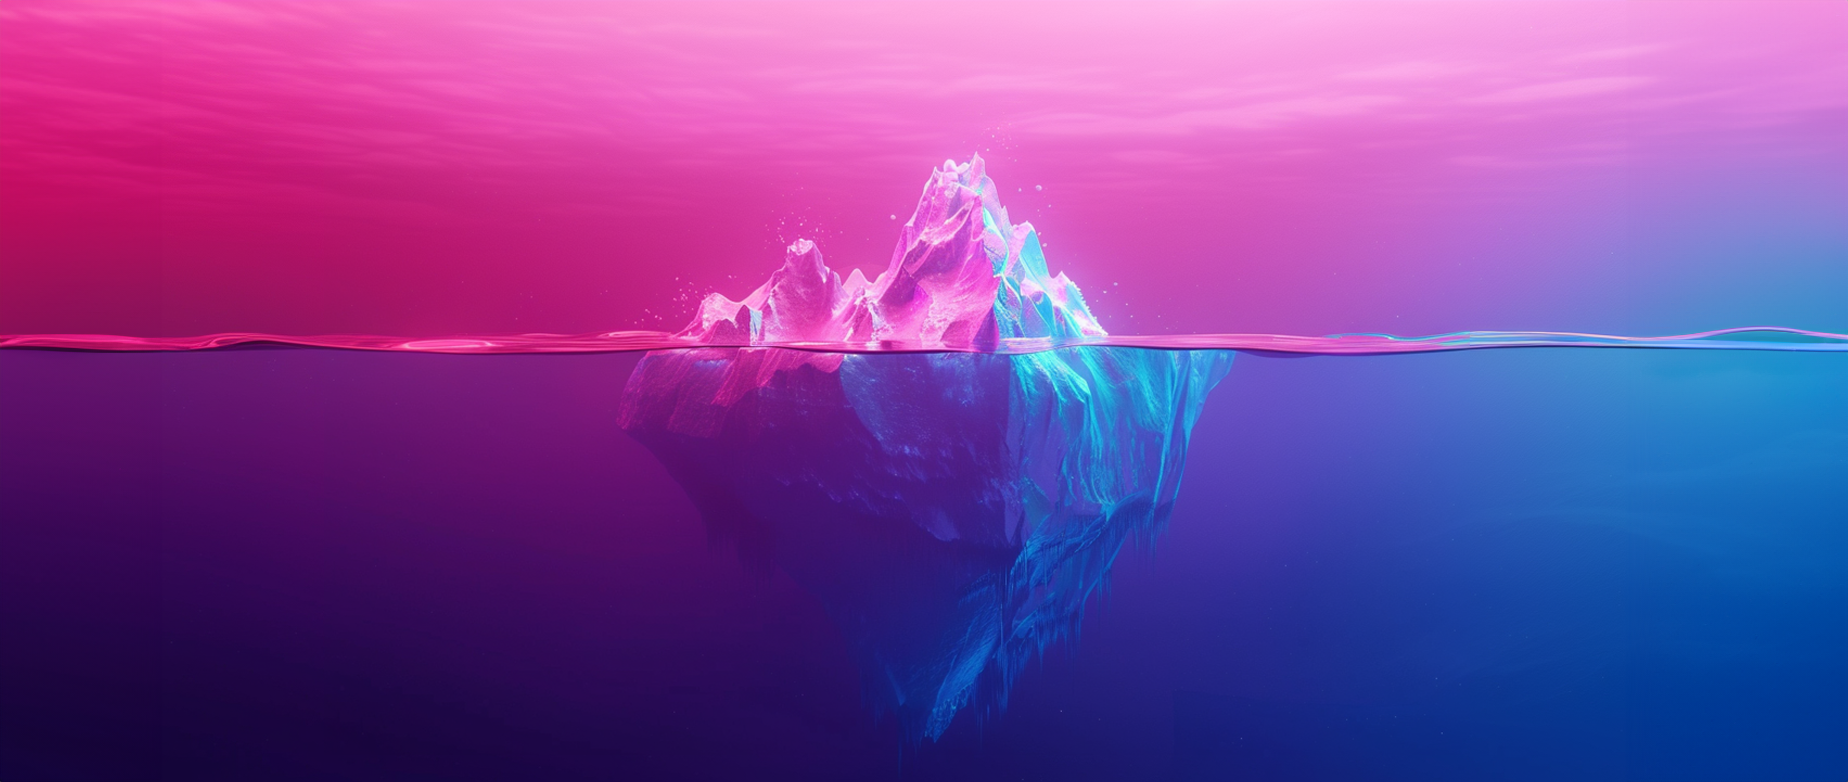 An iceberg on a pink and blue background.